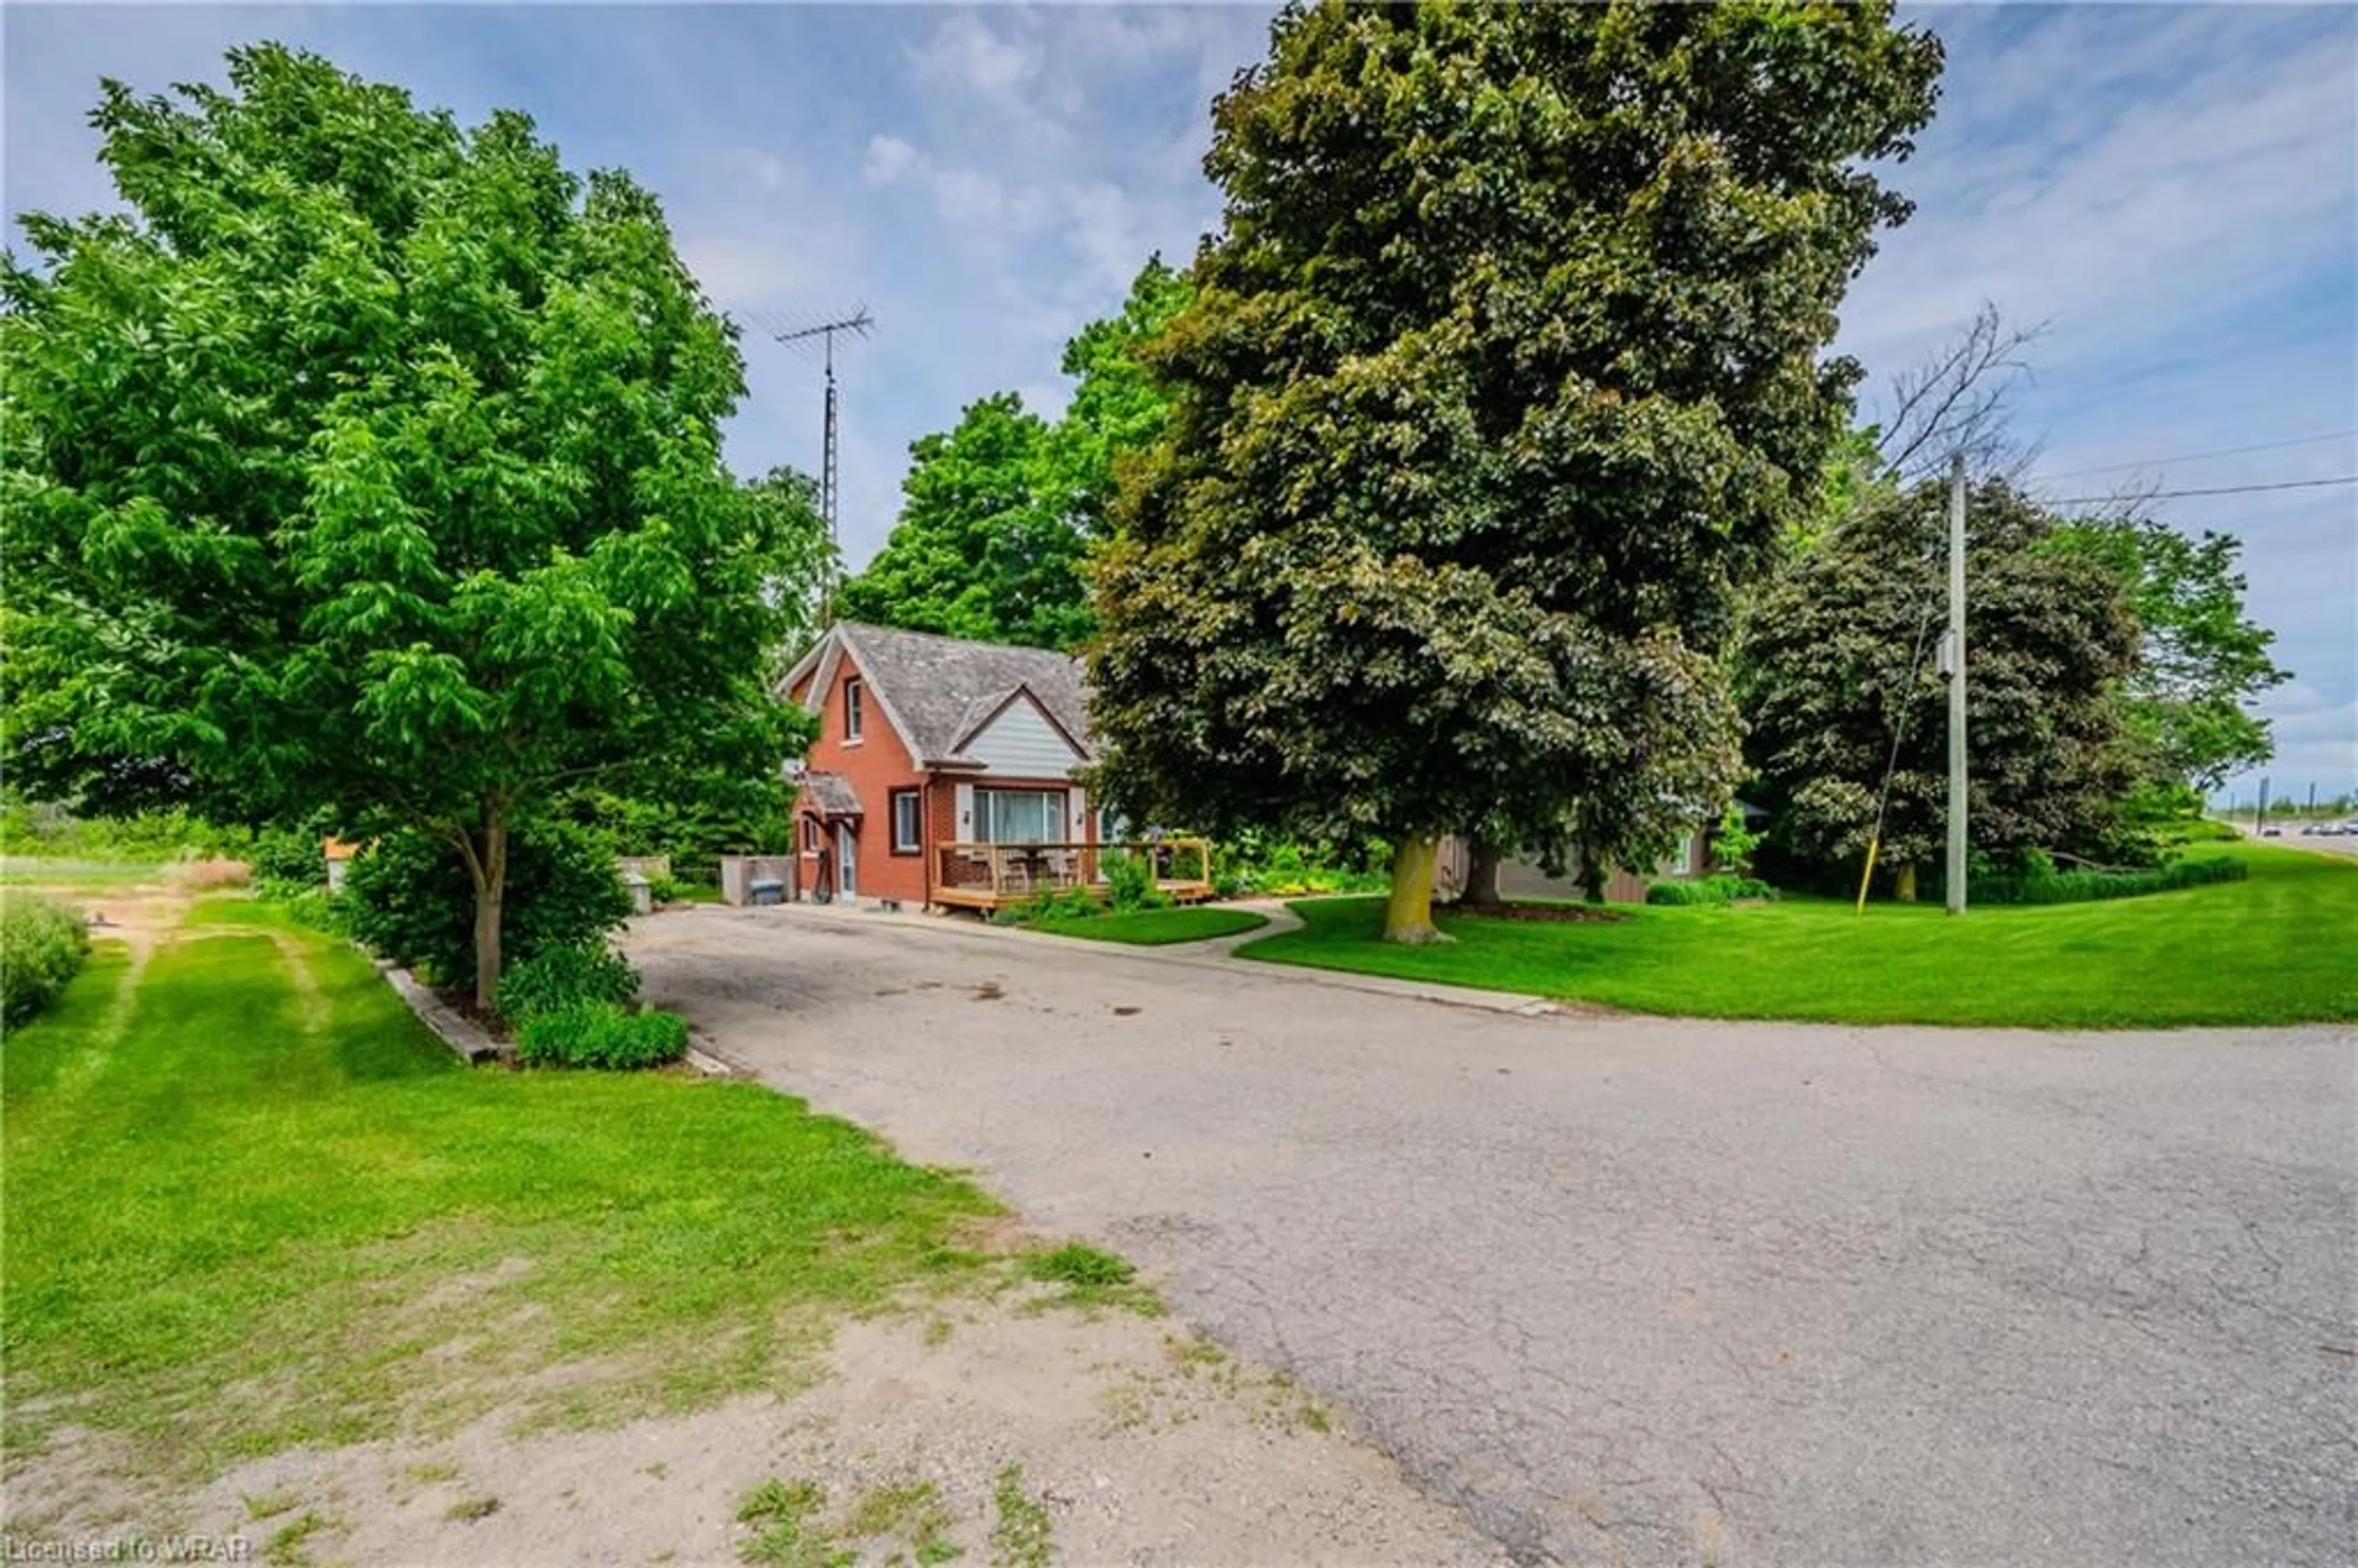 Street view for 3210 Victoria St, Woolwich Ontario N0B 1M0